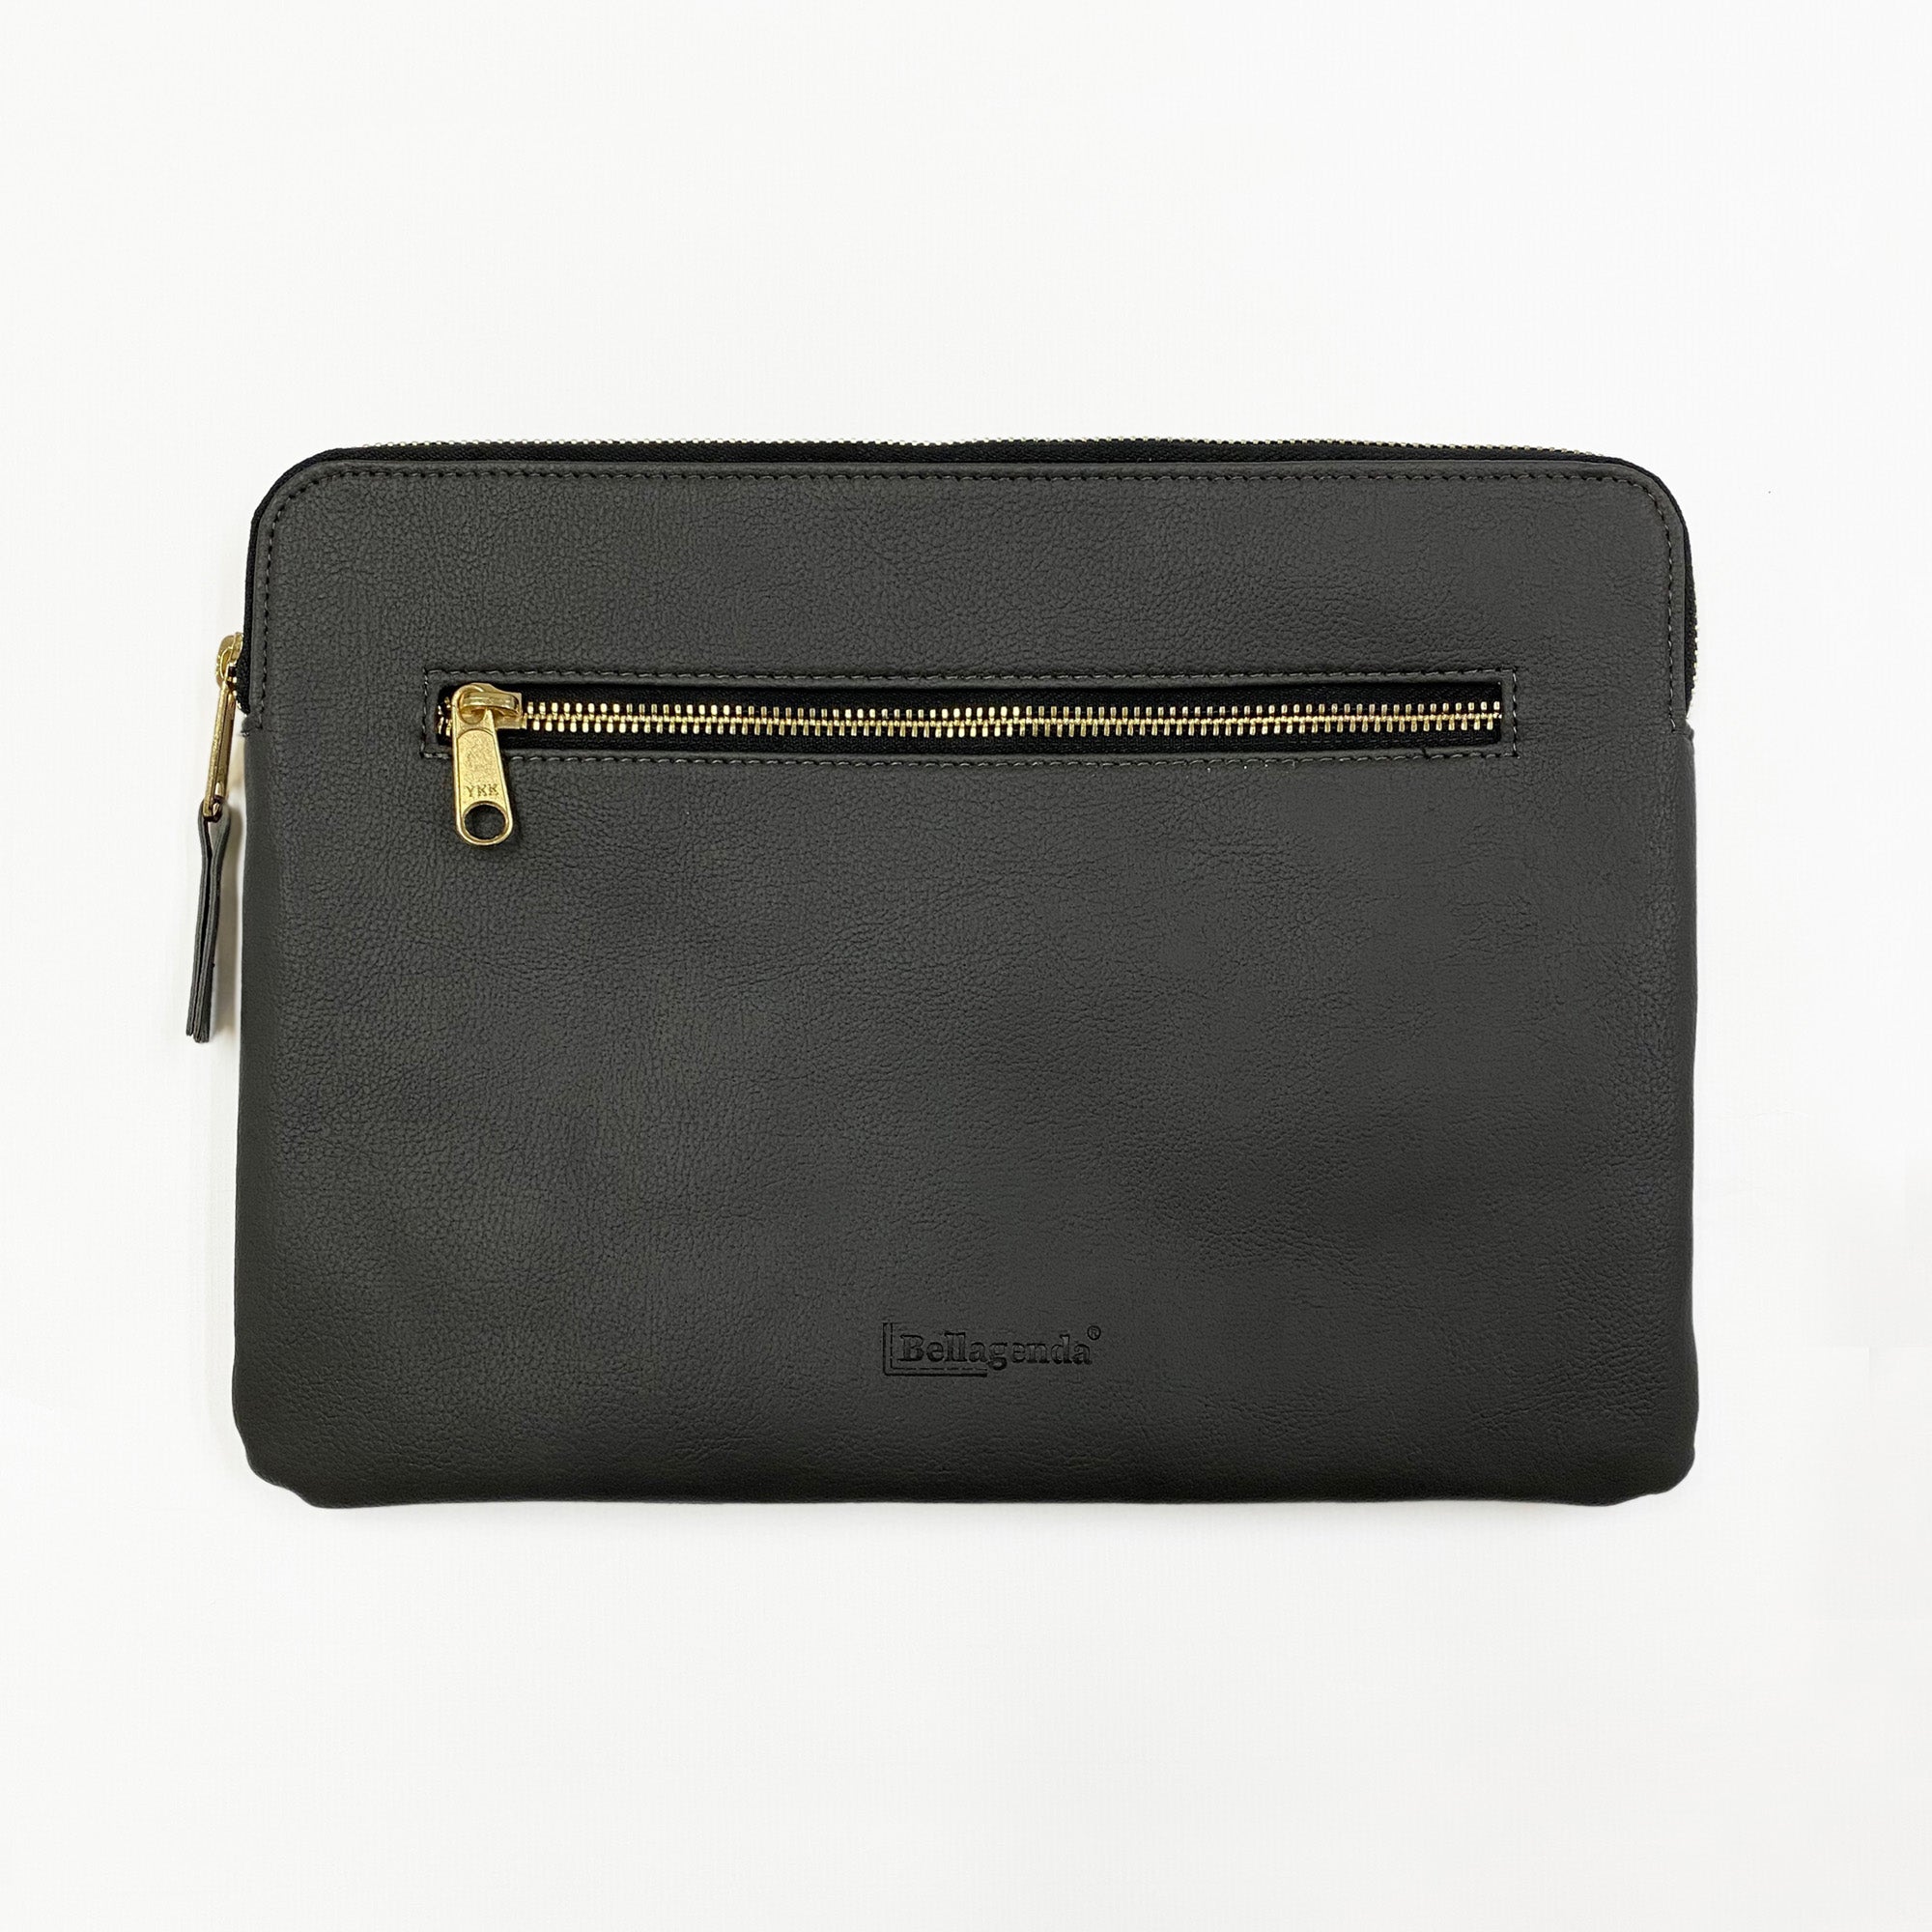 Tablet sleeve with zipper closure and back pocket